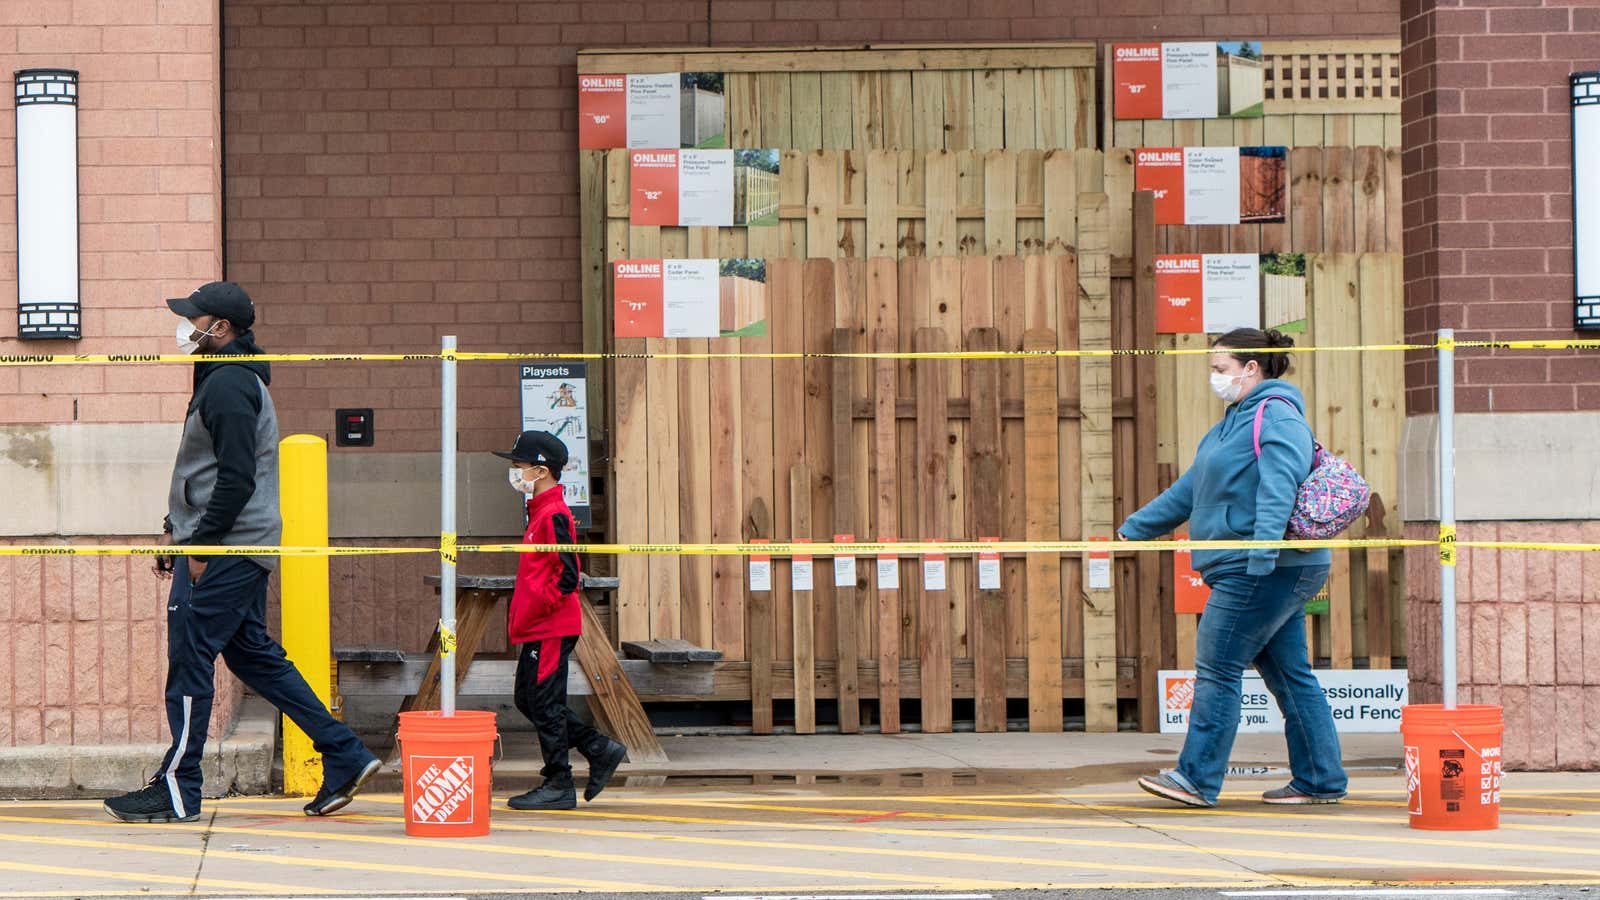 A lot of people walked into Home Depot last year.